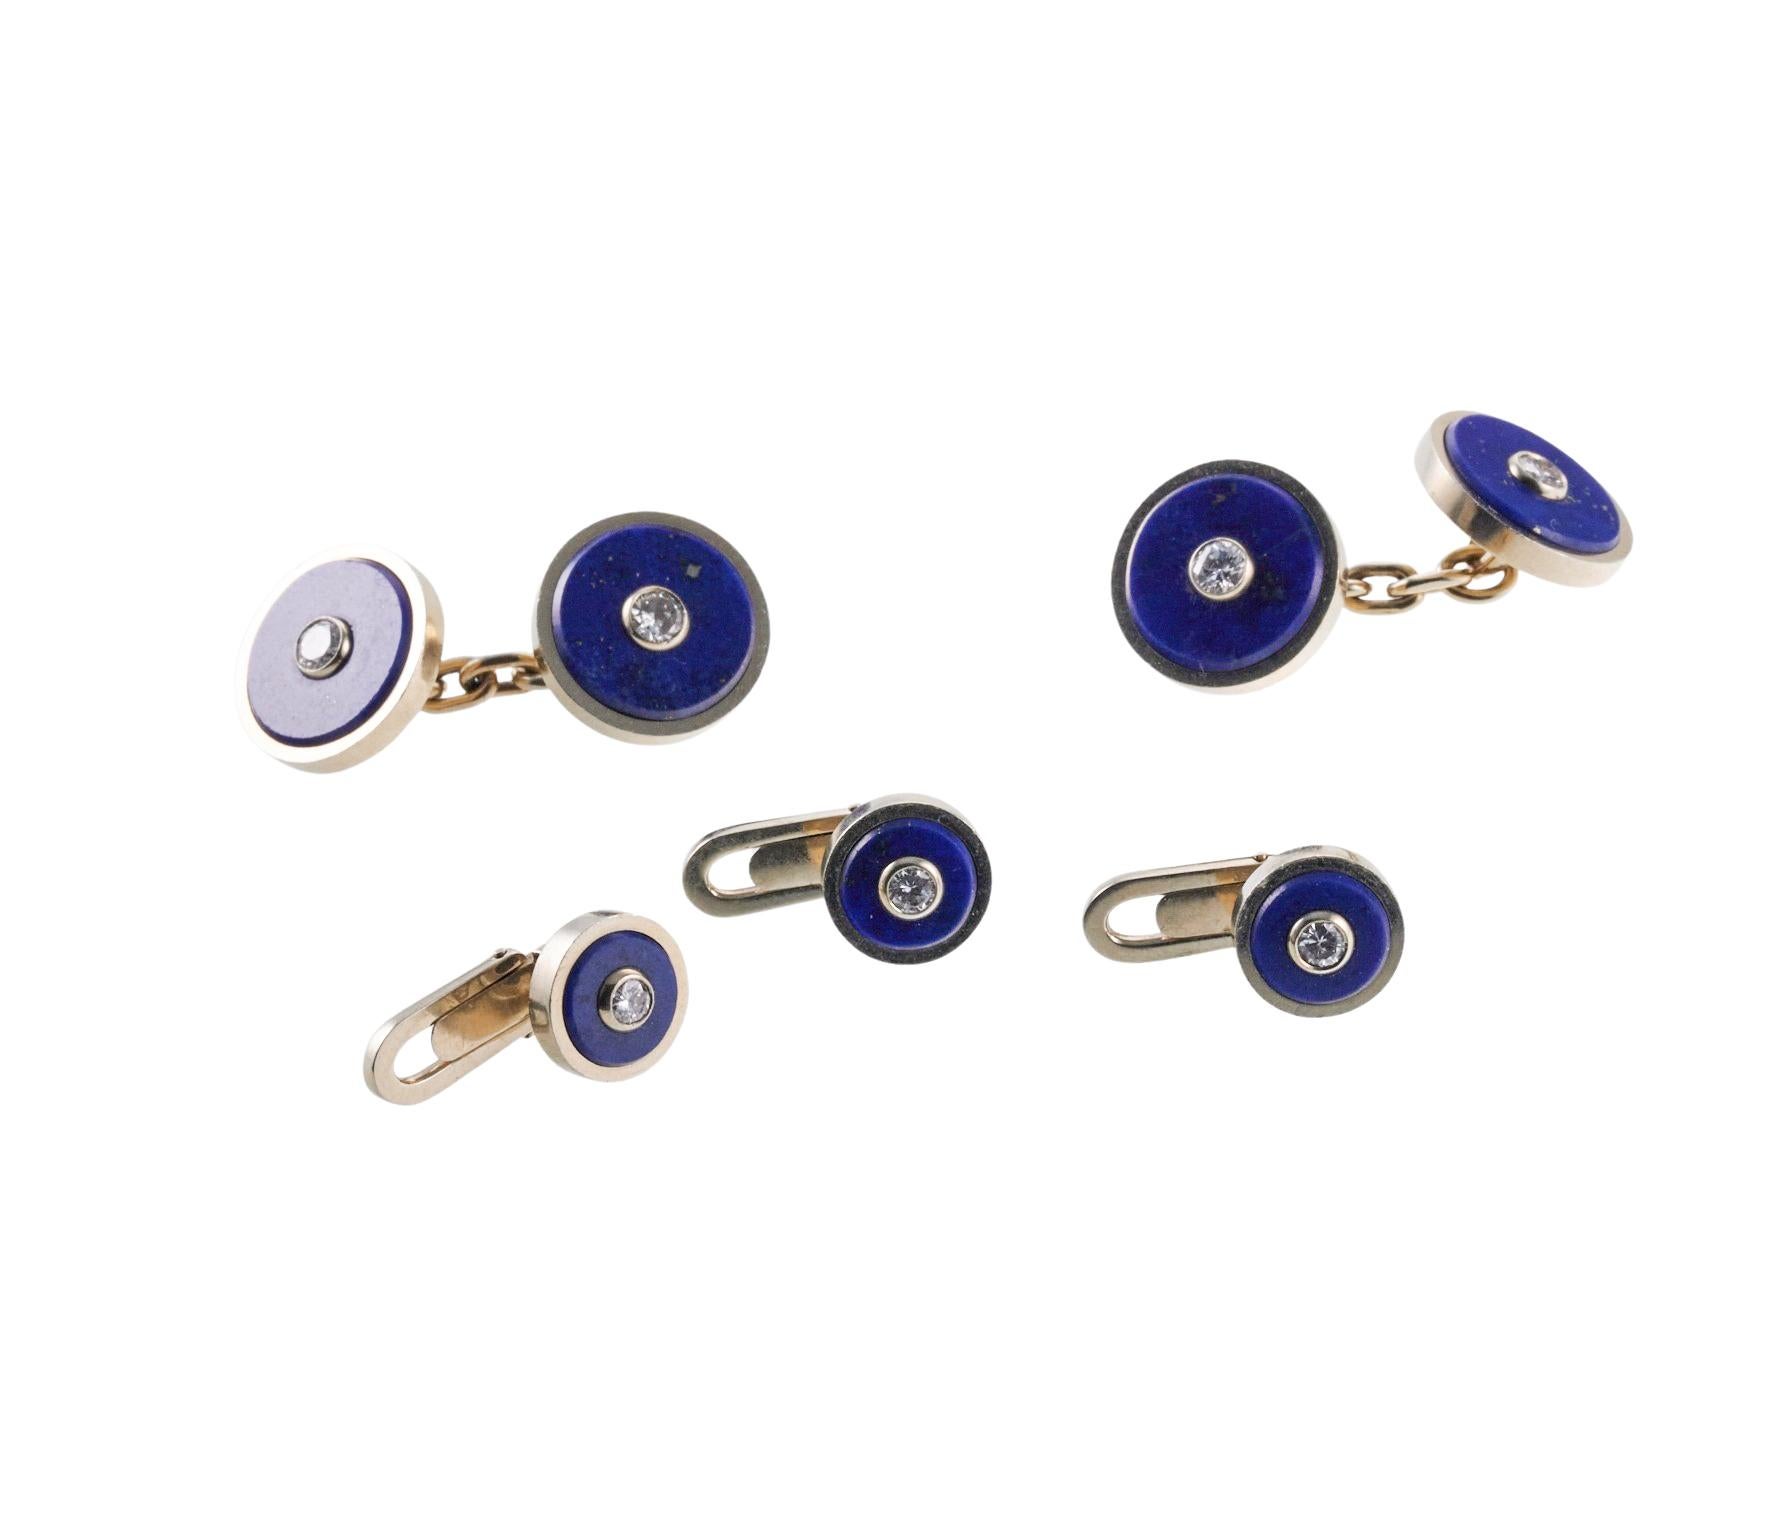 Set of 18k gold Italian made cufflinks and studs - set with lapis lazuli and a diamond in the center. Cufflink top measures 13mm in diameter, stud - 8mm. Diamond total approx. 0.35ctw H/VS. Set comes in original retailer's fitted box - Piccini of